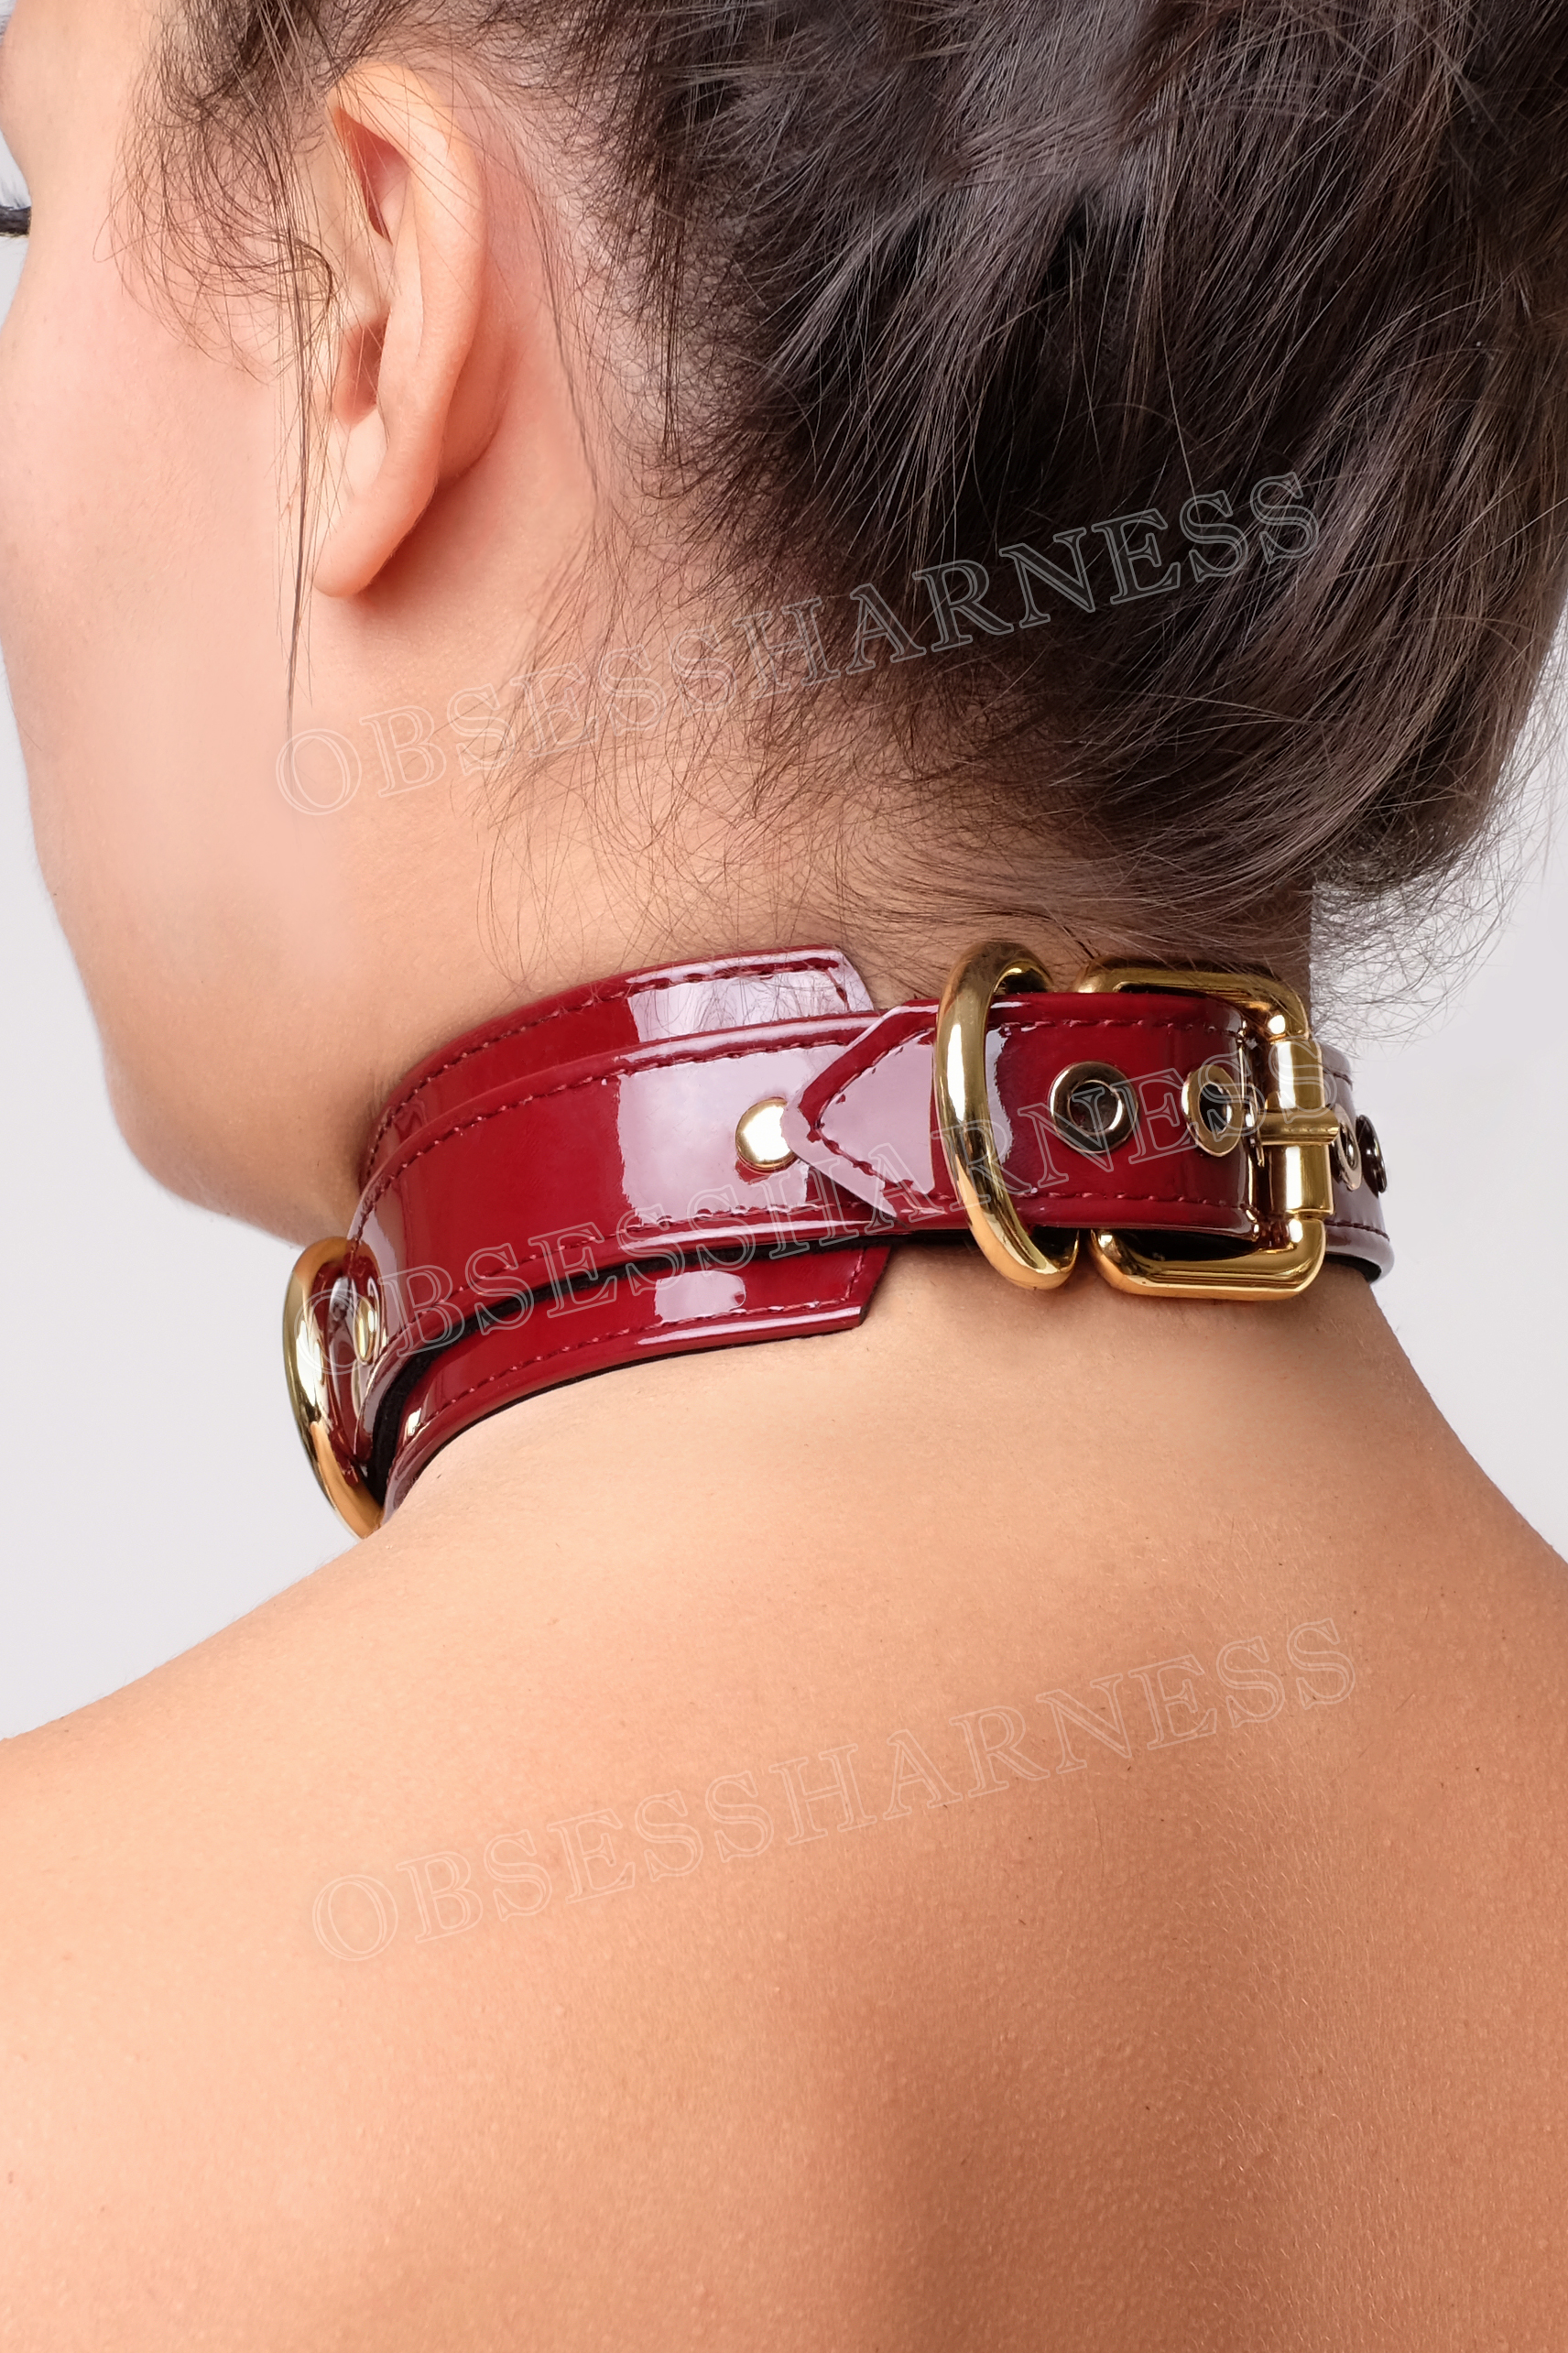  collar choker  women with a clasp at the back, a large ring in the center and metal half rings for attaching a leash and kink in BDSM